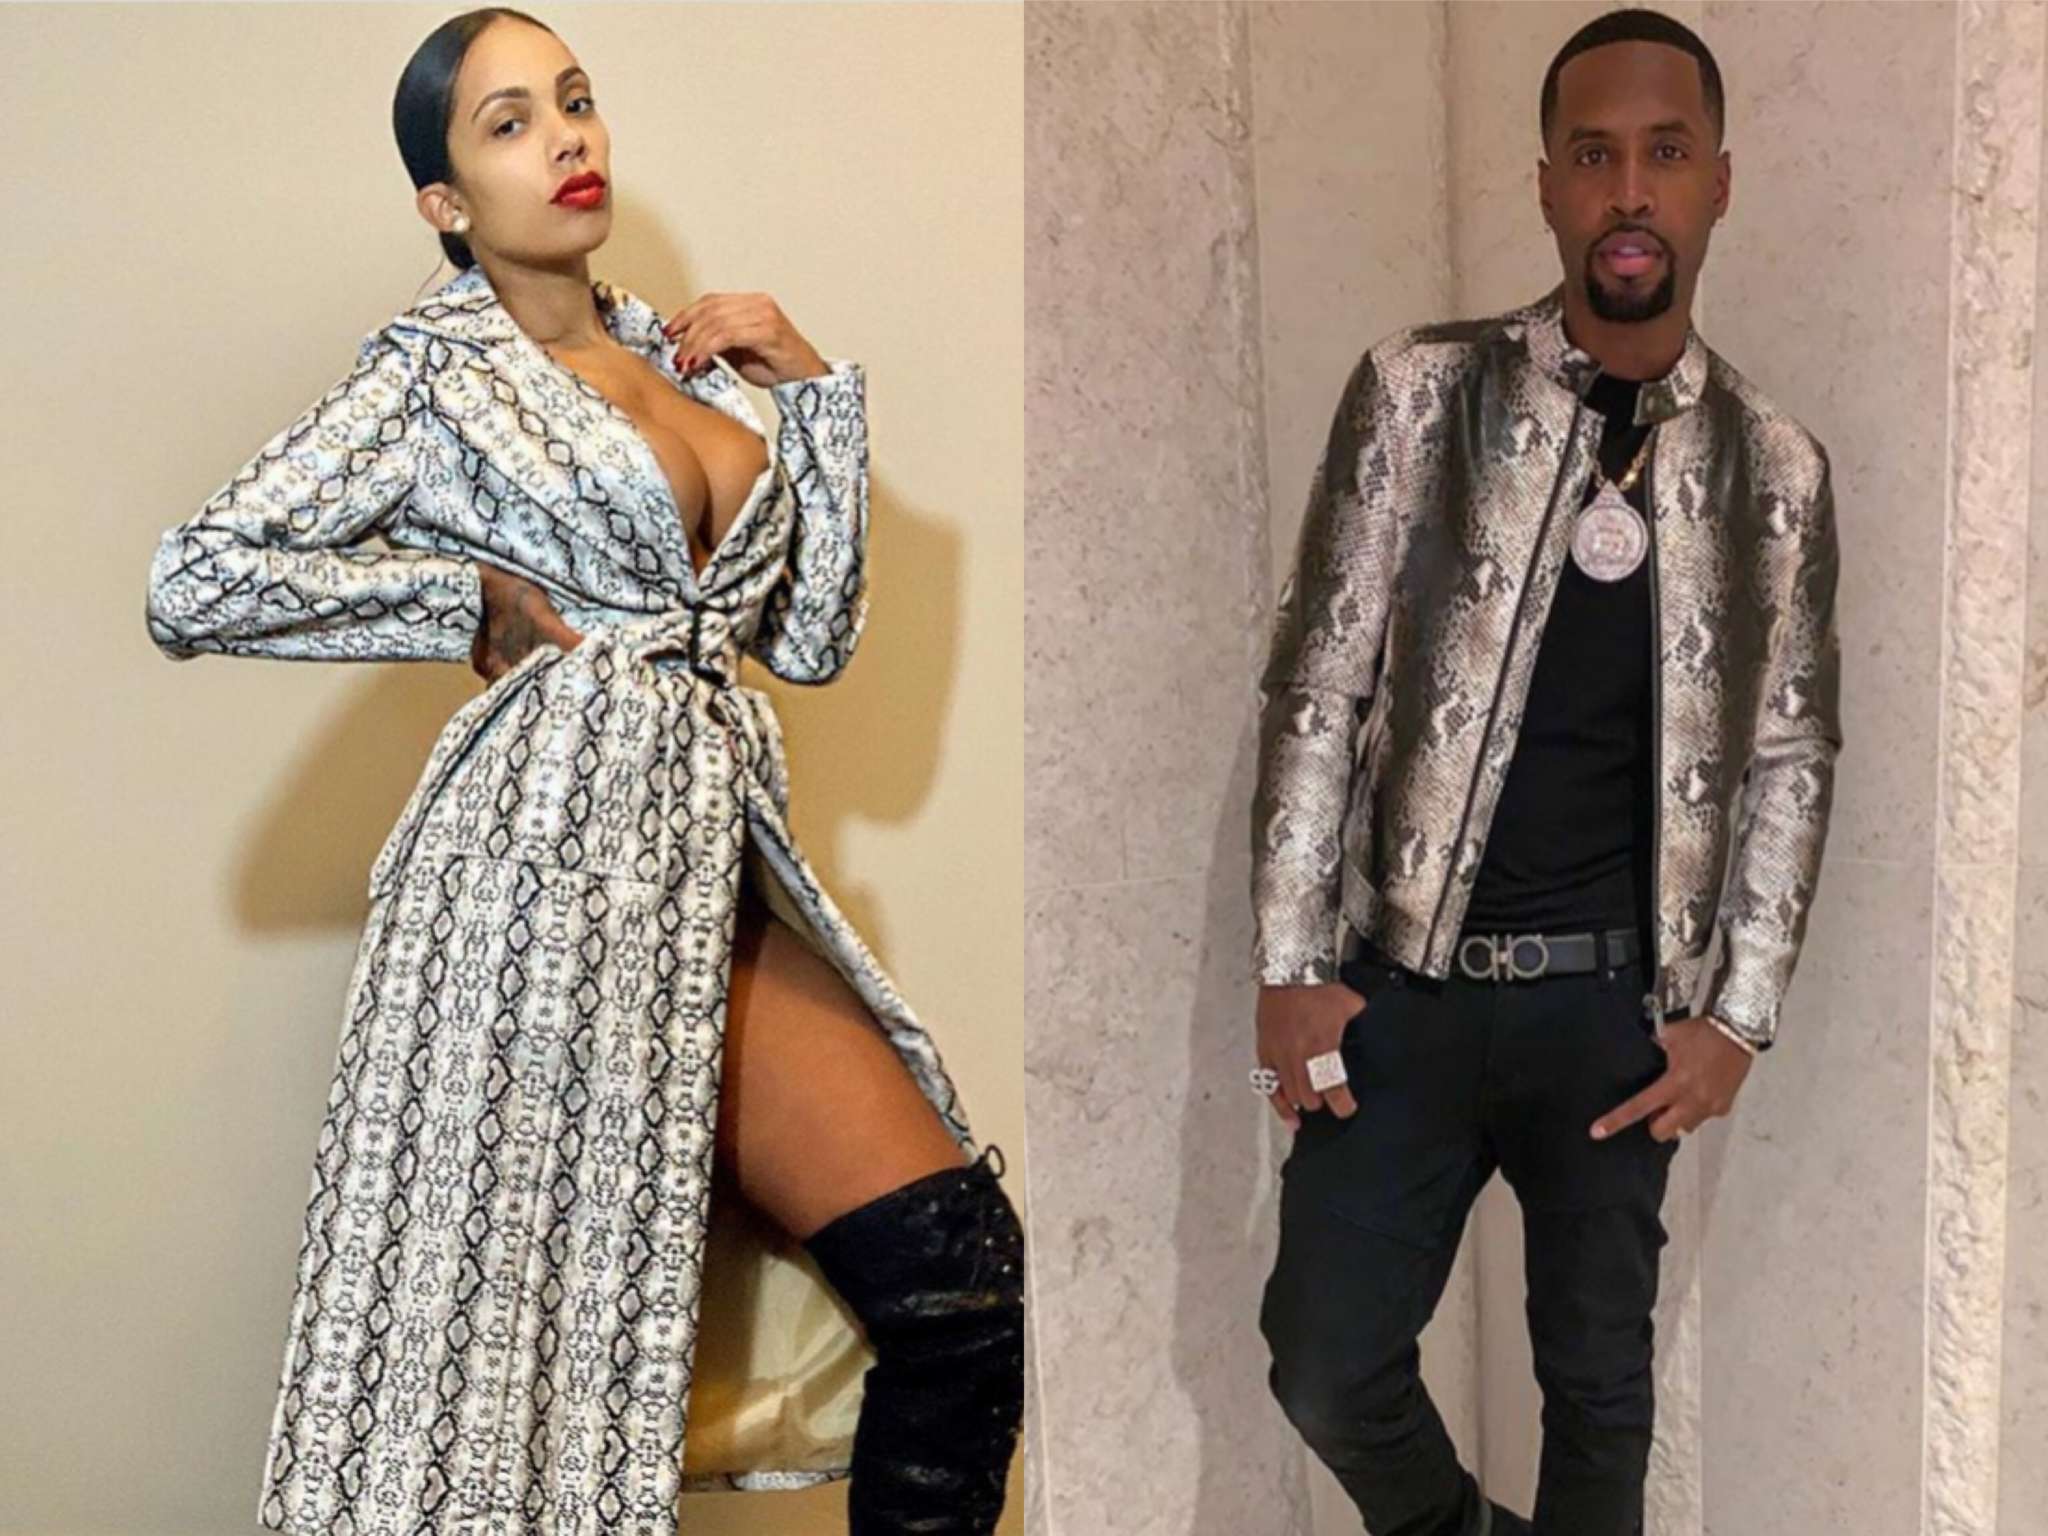 Erica Mena Supports Husband Safaree's New Music And Cannot Stop Listening To 'Parasites' During The Virus Outbreak